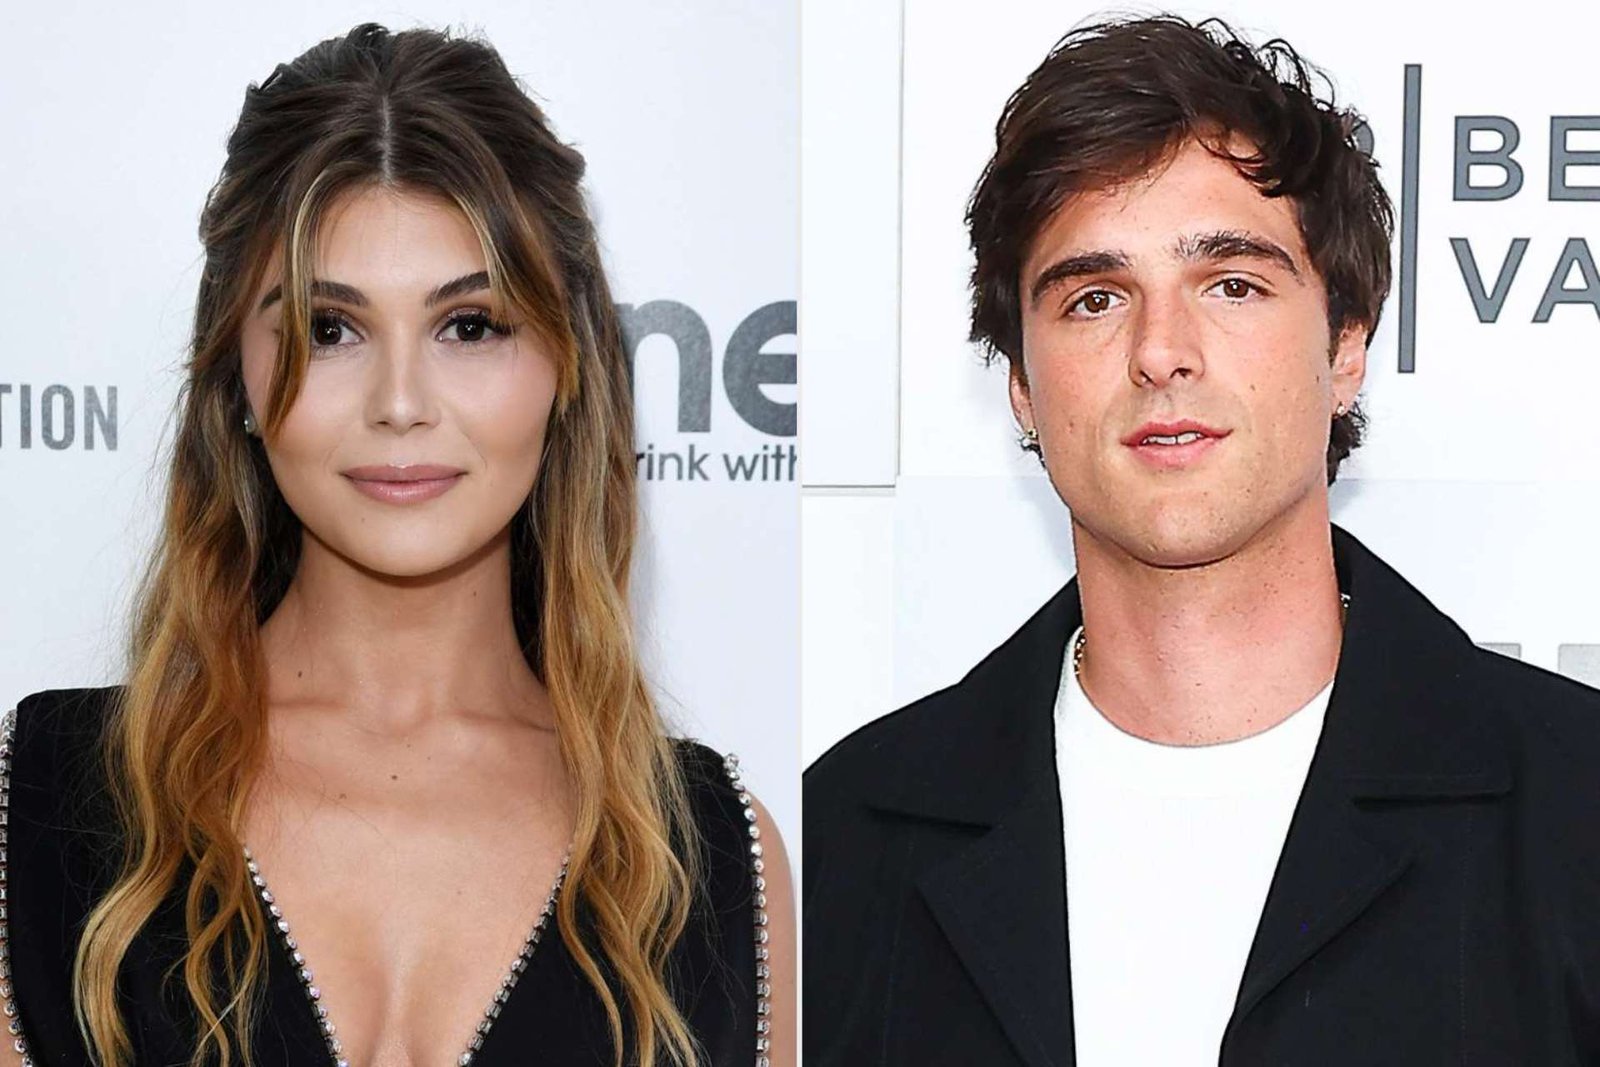 On-and-Off Again: Jacob Elordi and Olivia Jade Giannulli Call It Quits Once